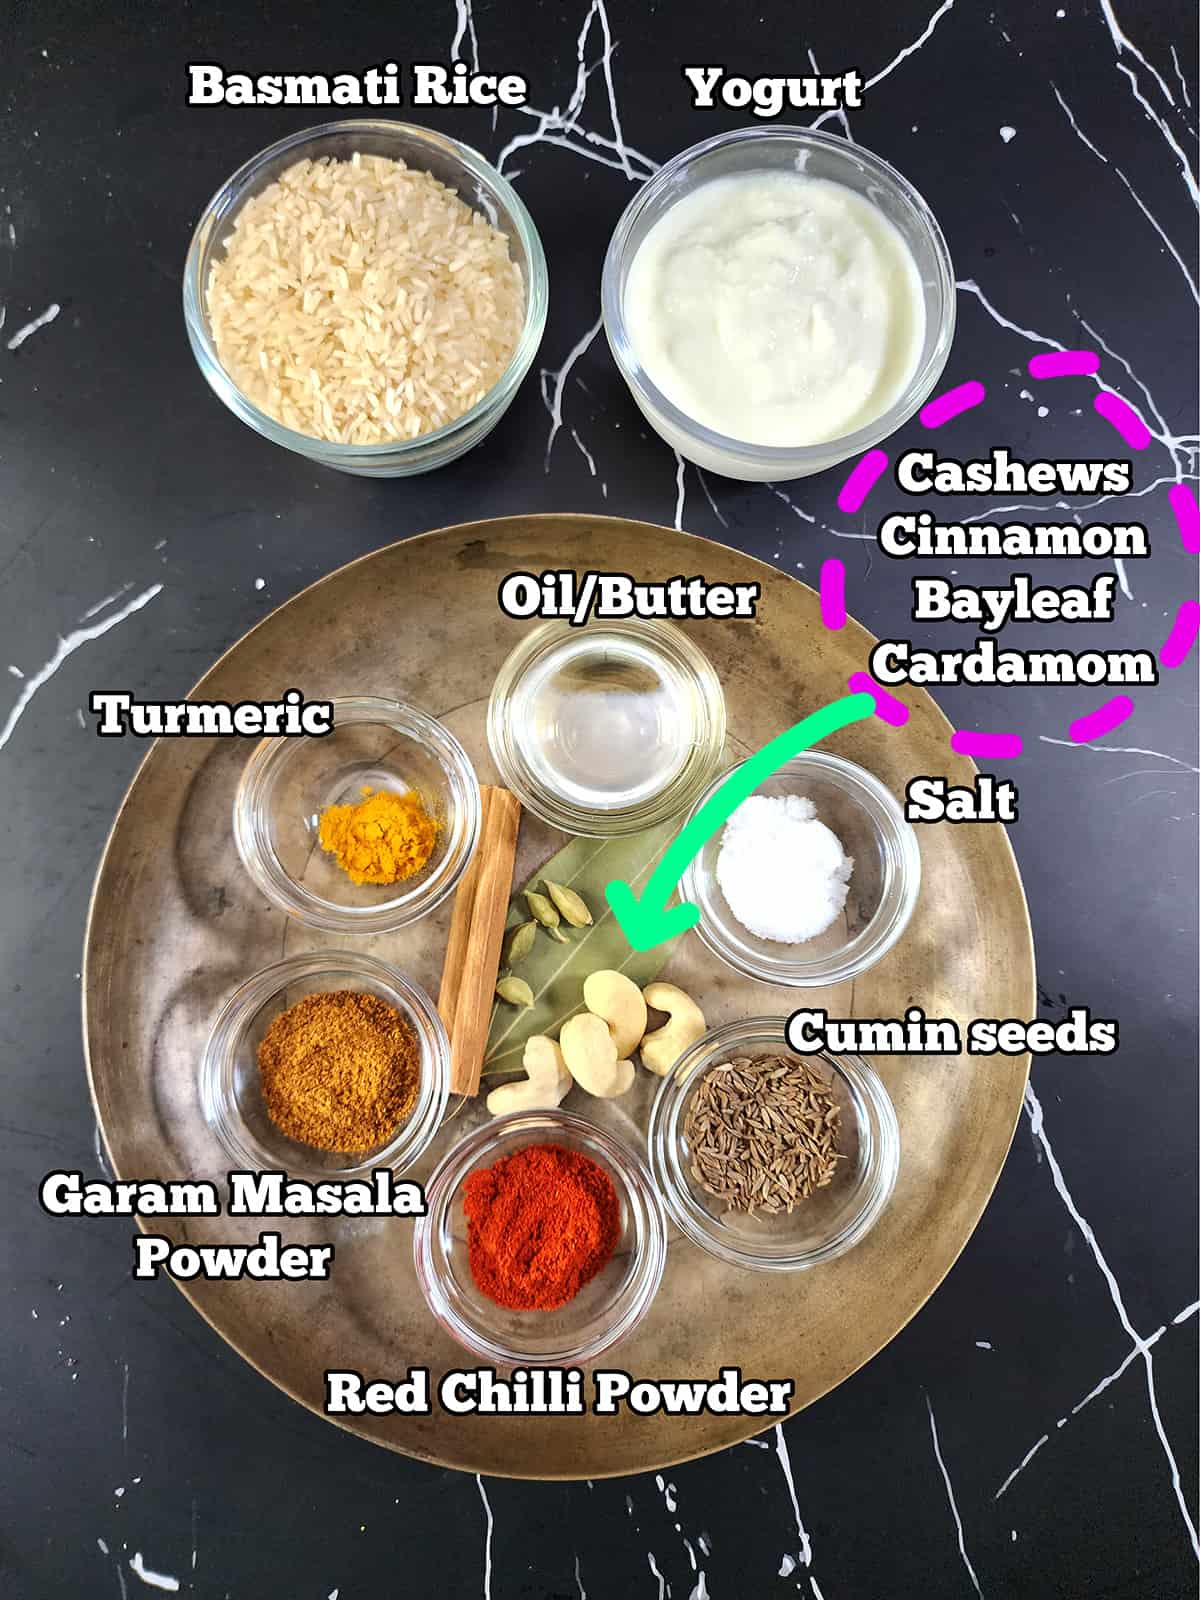 Whole aromatic spices and spice powders used to make biryani. 